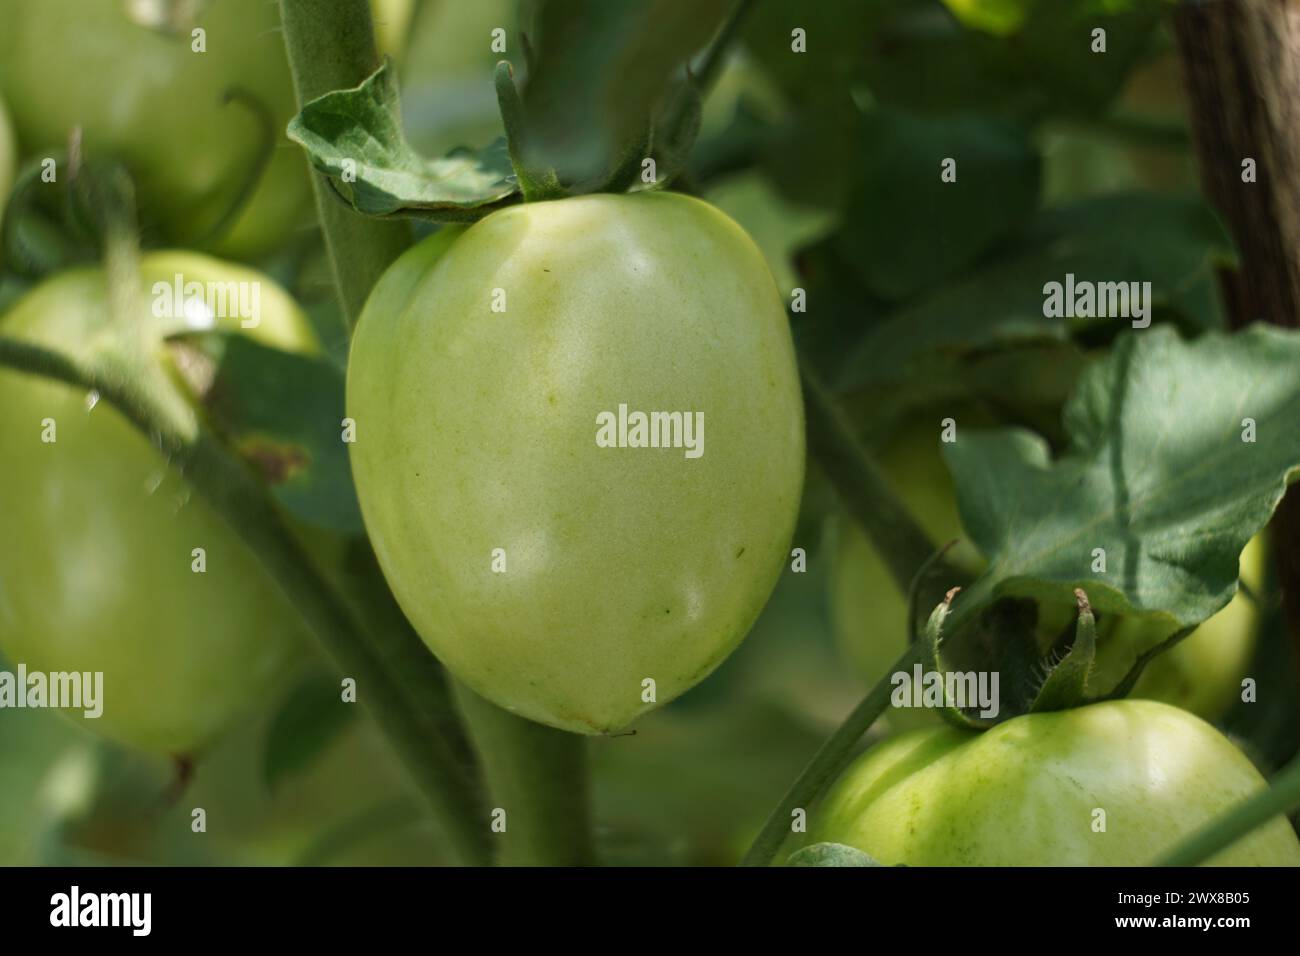 Green tomato (Also called Solanum lycopersicum, Lycopersicon lycopersicum, Lycopersicon esculentum) on the tree Stock Photo